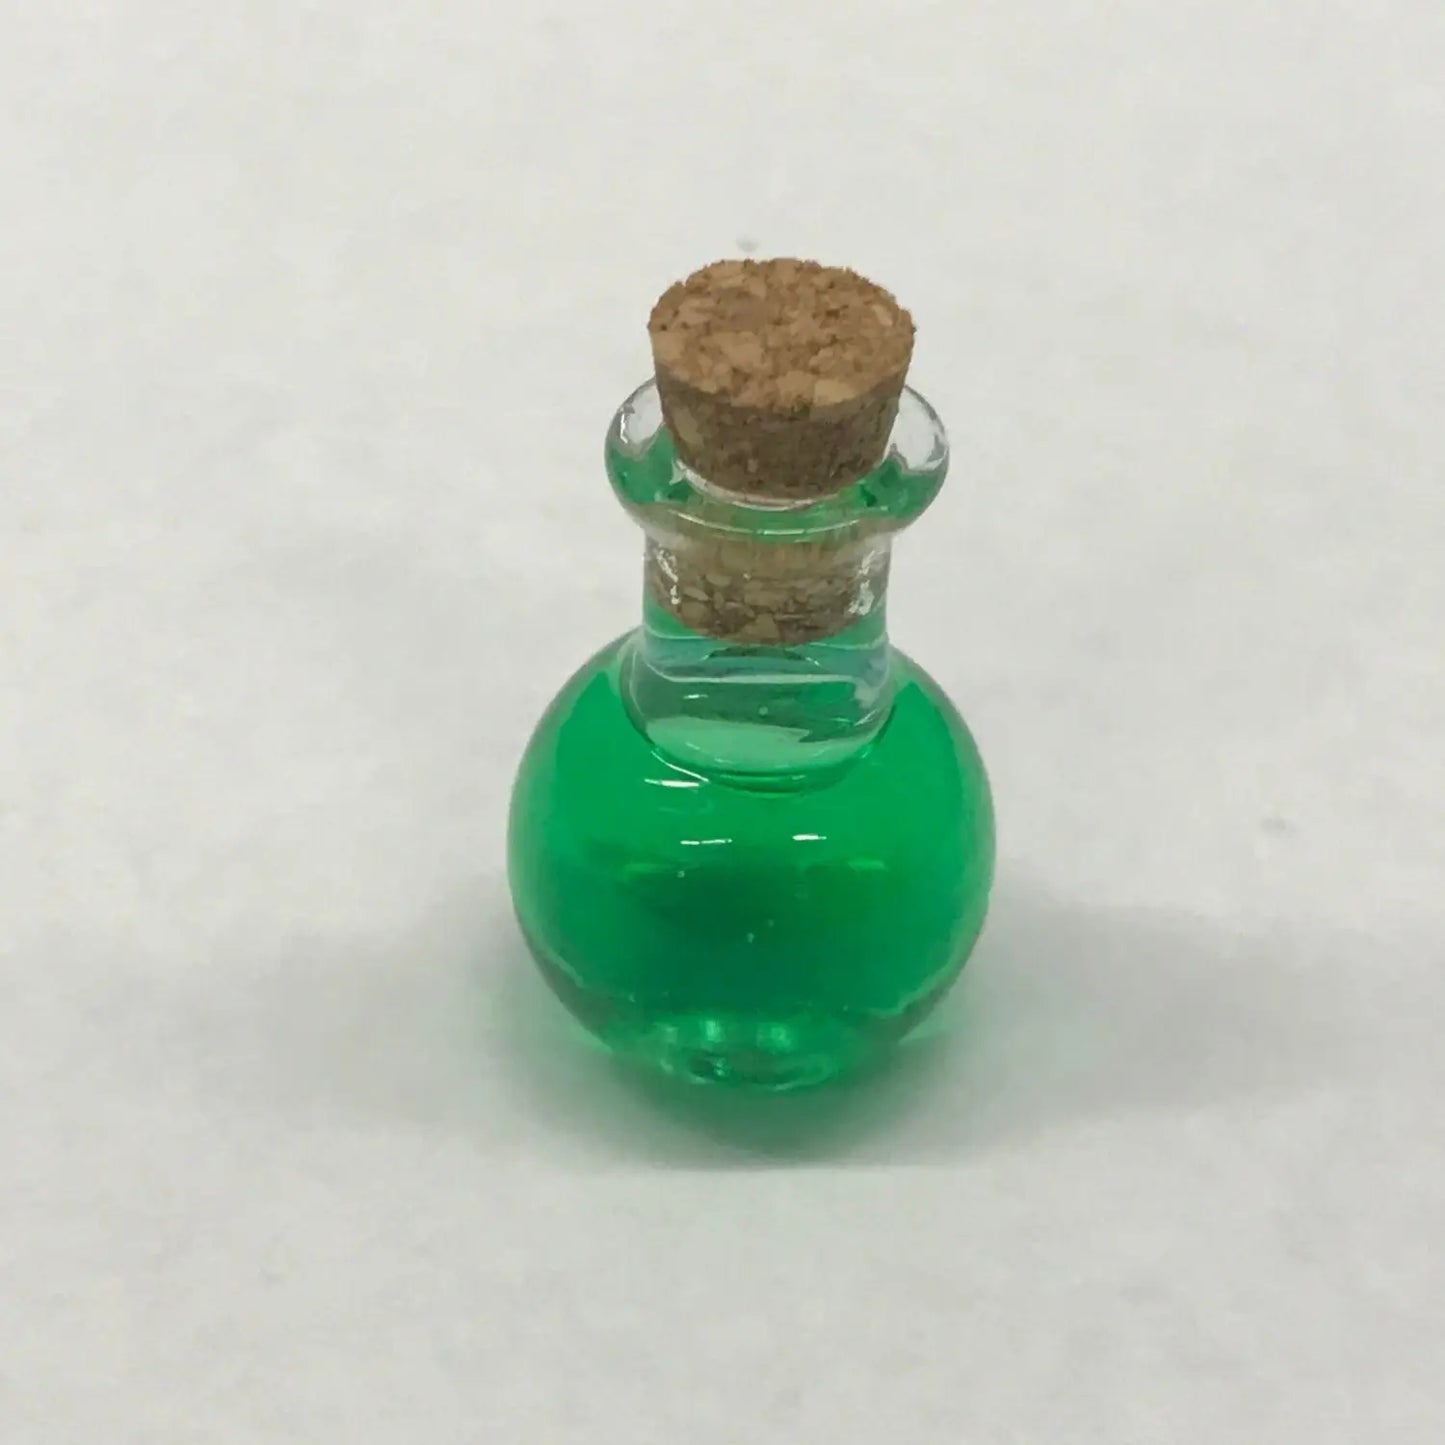 Tabletop Gaming Decorative Potions - Green / Round - DnD